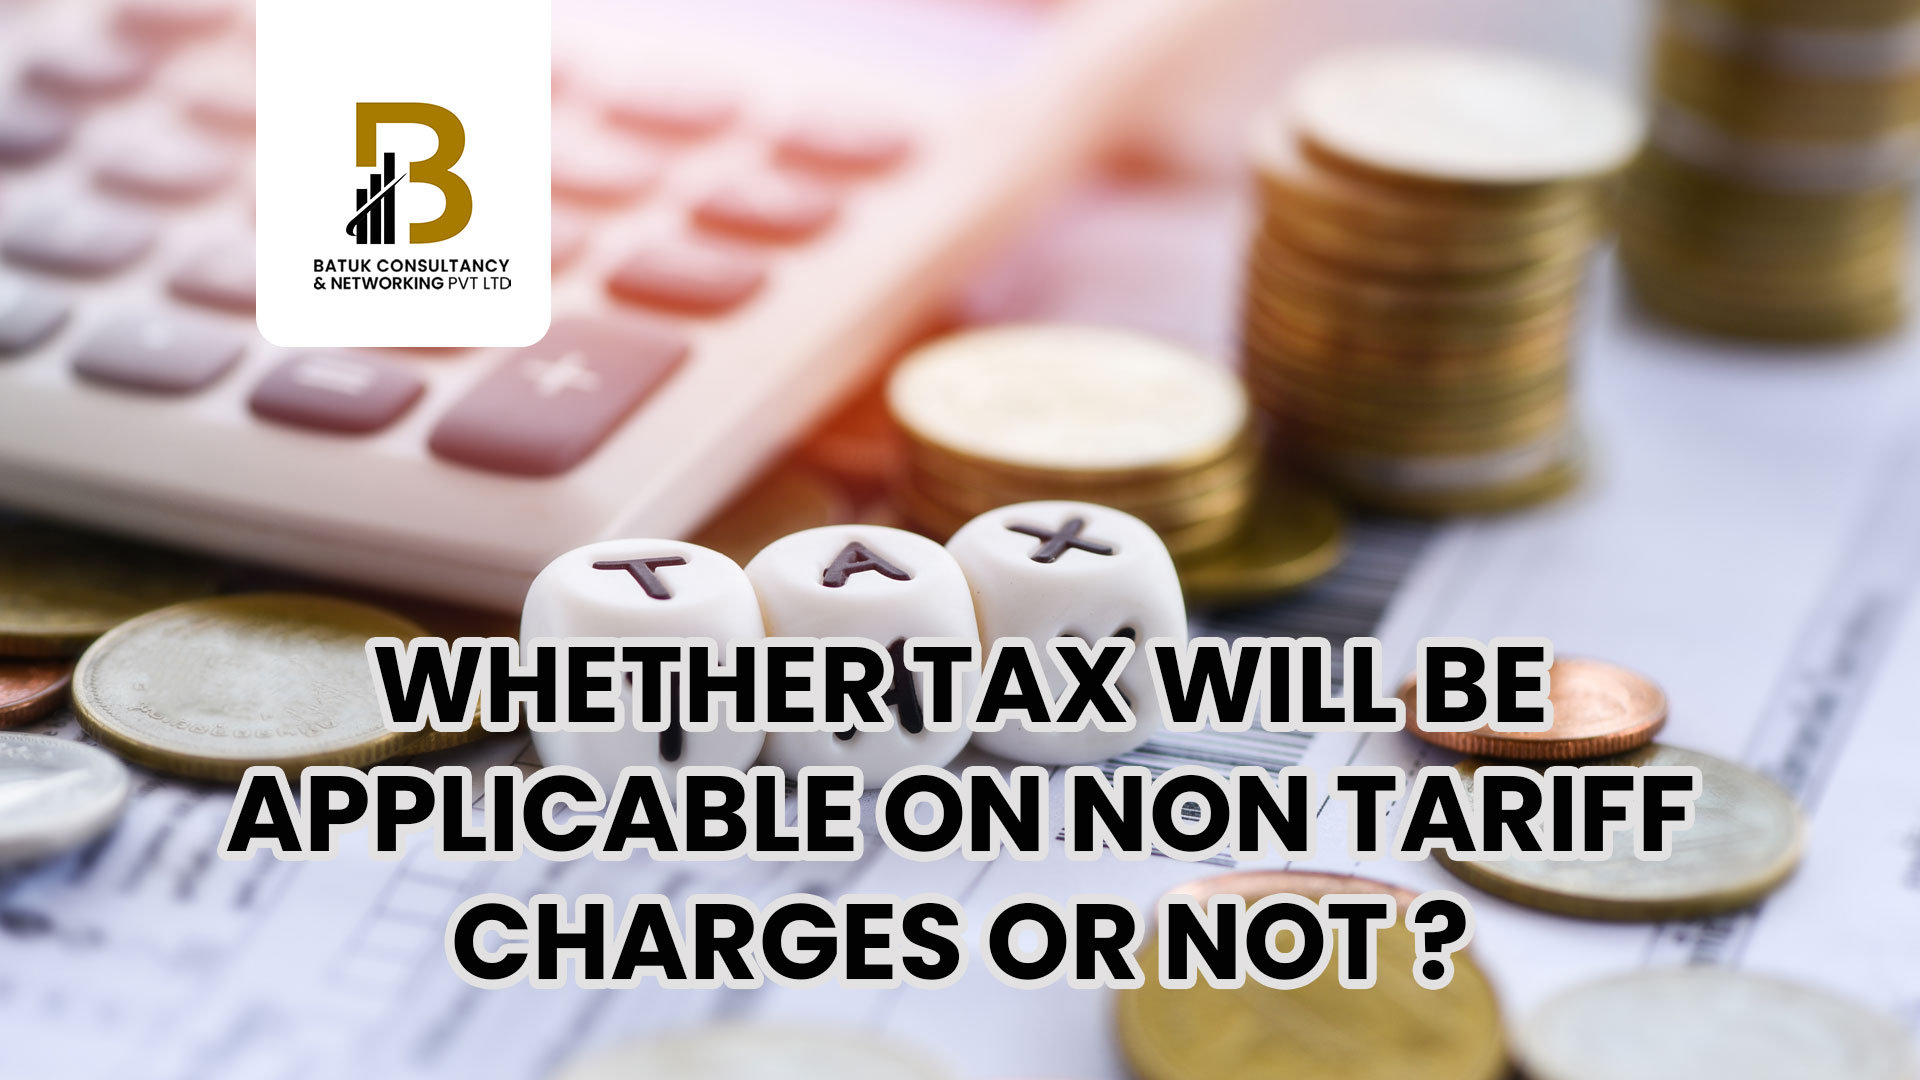 Whether Tax will be applicable on non tariff Charges or Not